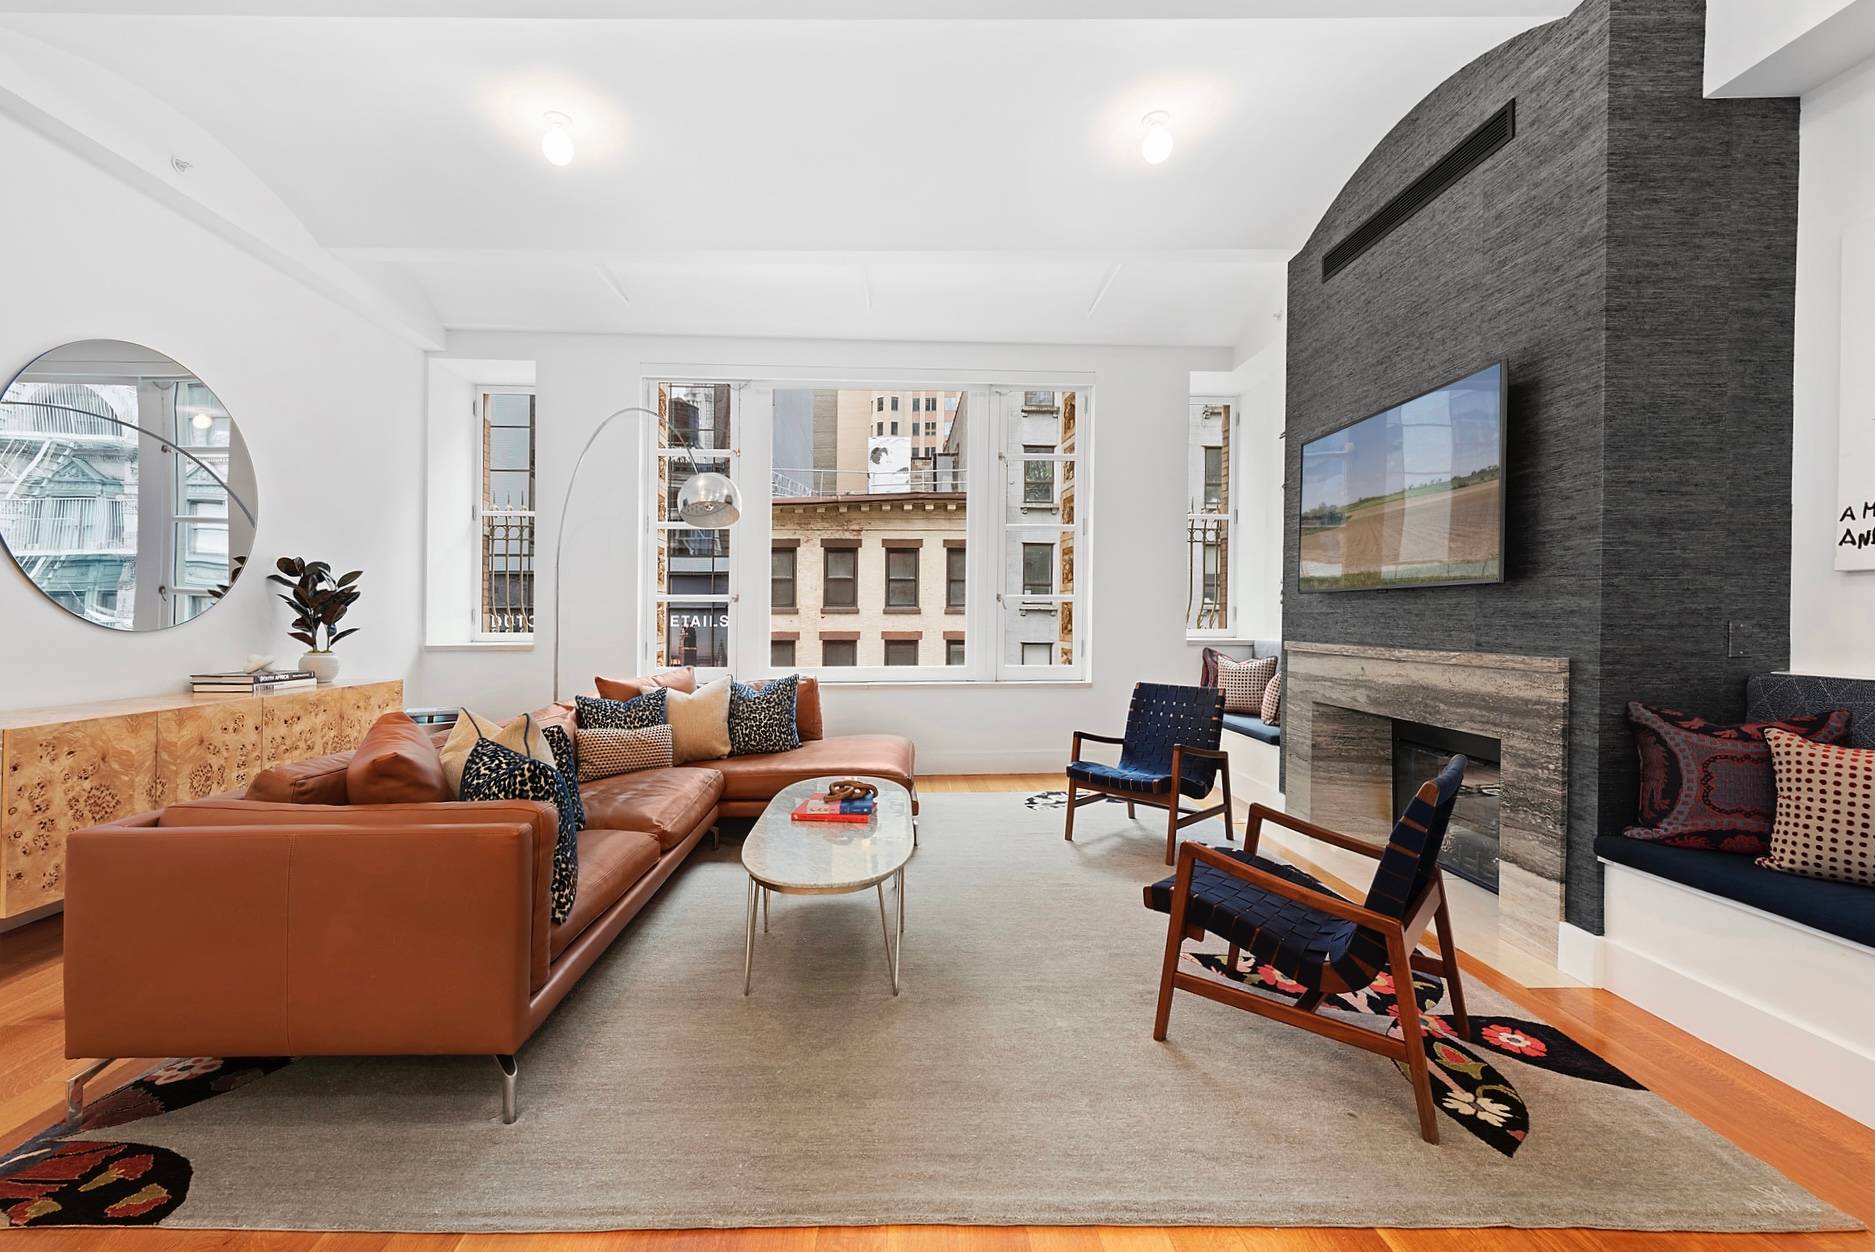 Designed by Studio DB, this exquisite full floor loft features grand proportions, two bedrooms plus den or home office, three full bathrooms and flawless designer finishes in a landmarked architectural ...